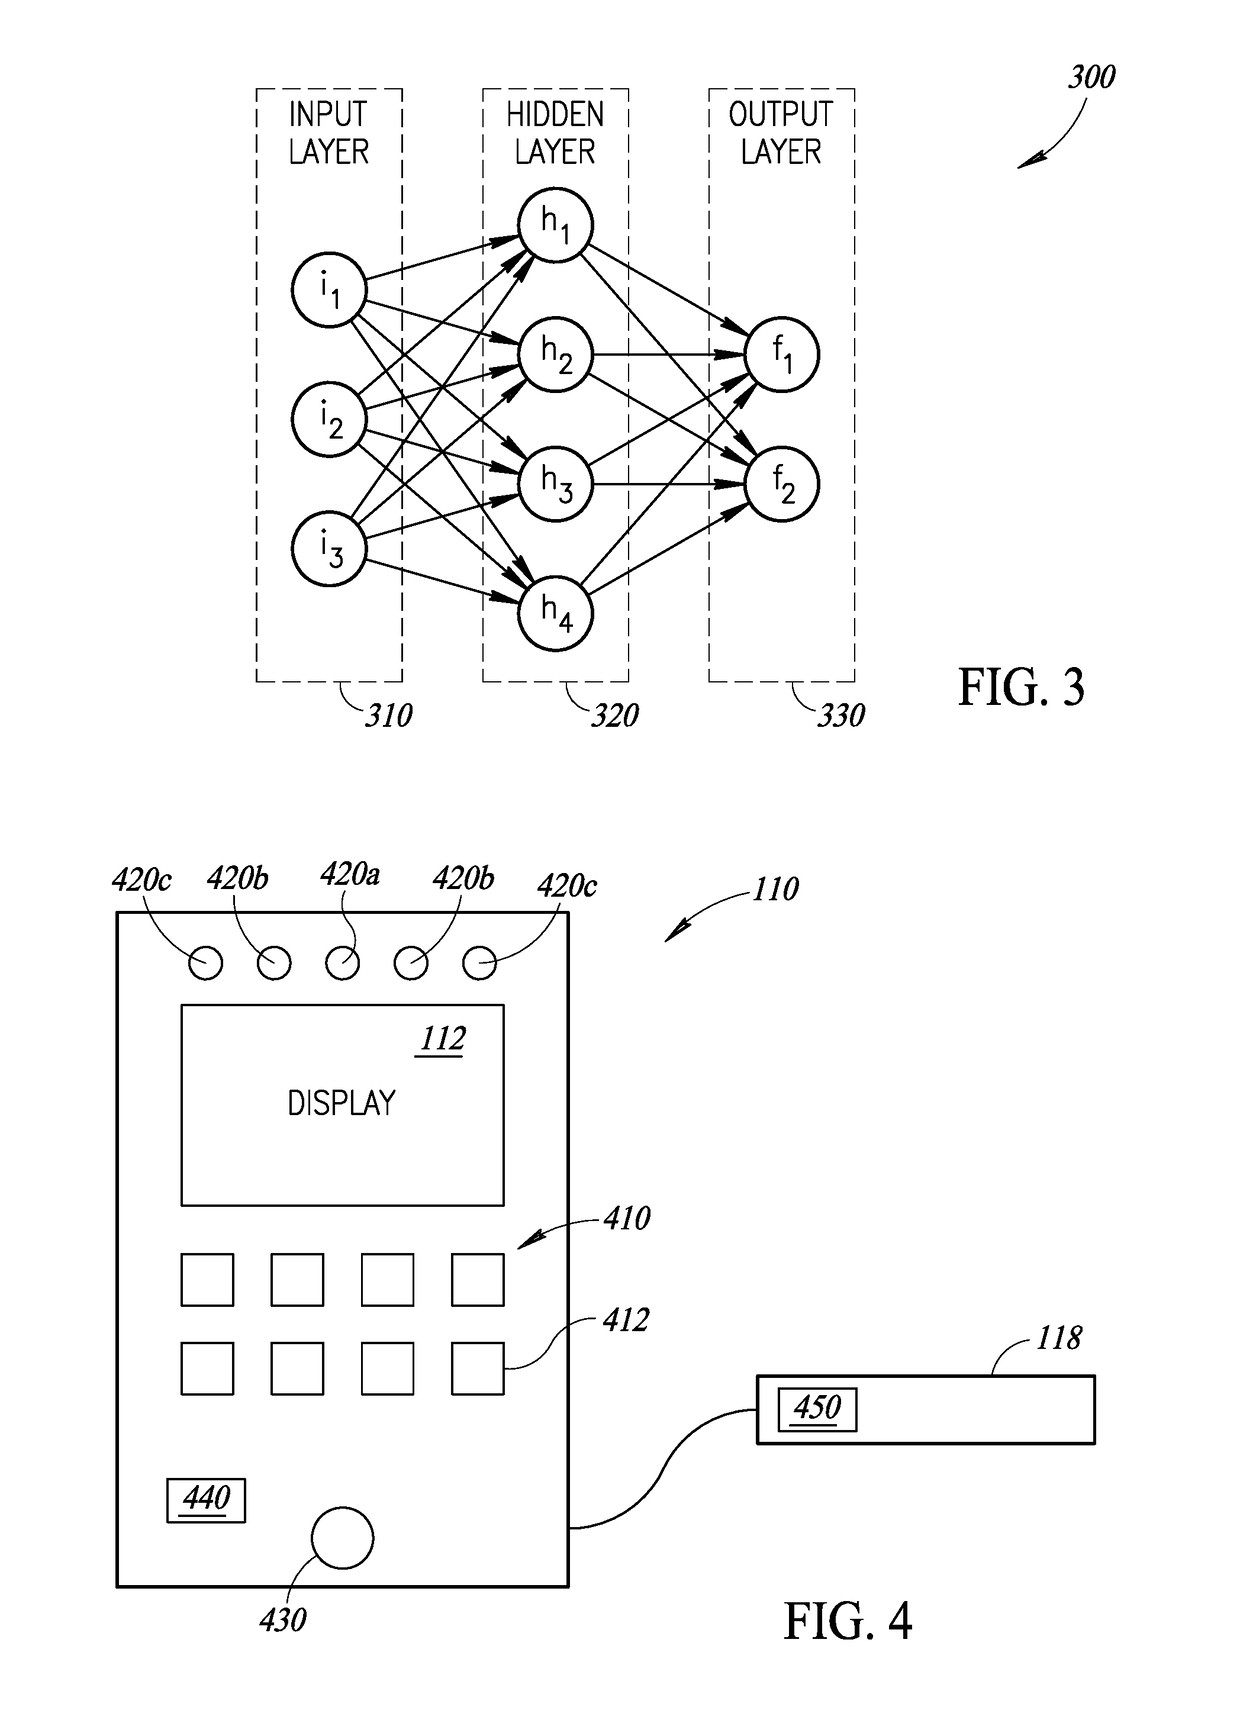 Ultrasound image recognition systems and methods utilizing an artificial intelligence network